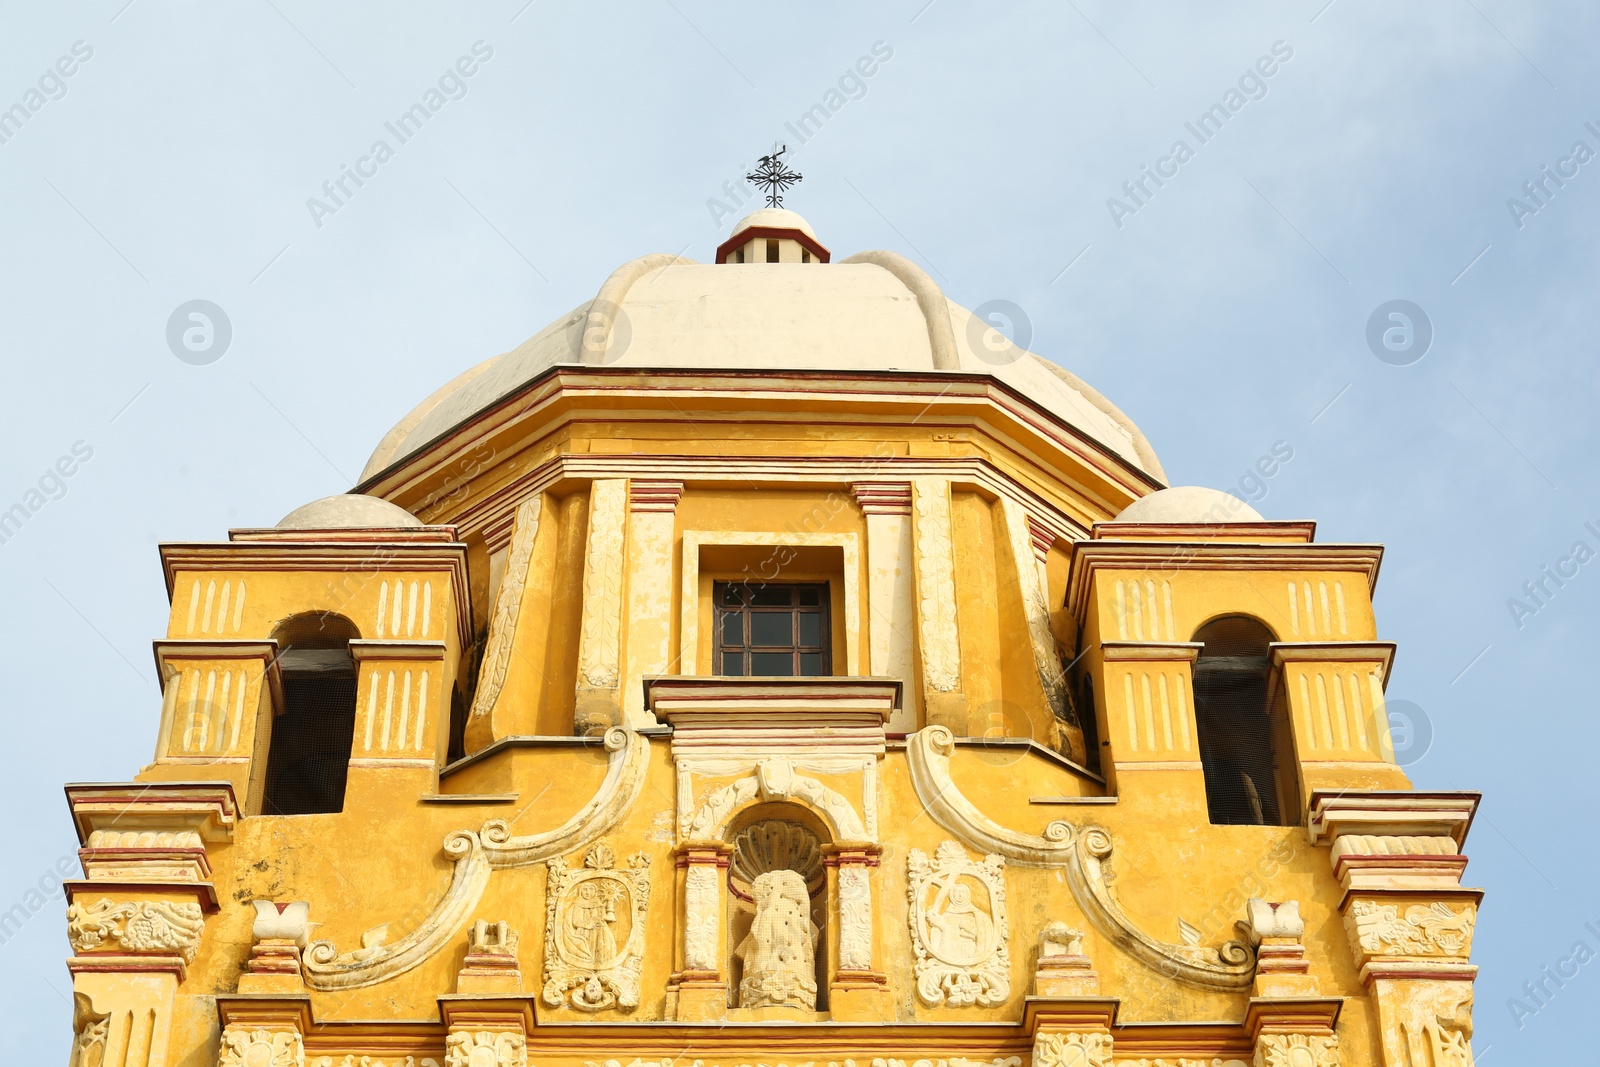 Photo of Monterrey, Mexico - September 2, 2022: Beautiful view of Nuevo Leon Regional Museum of Bishop's Palace against blue sky